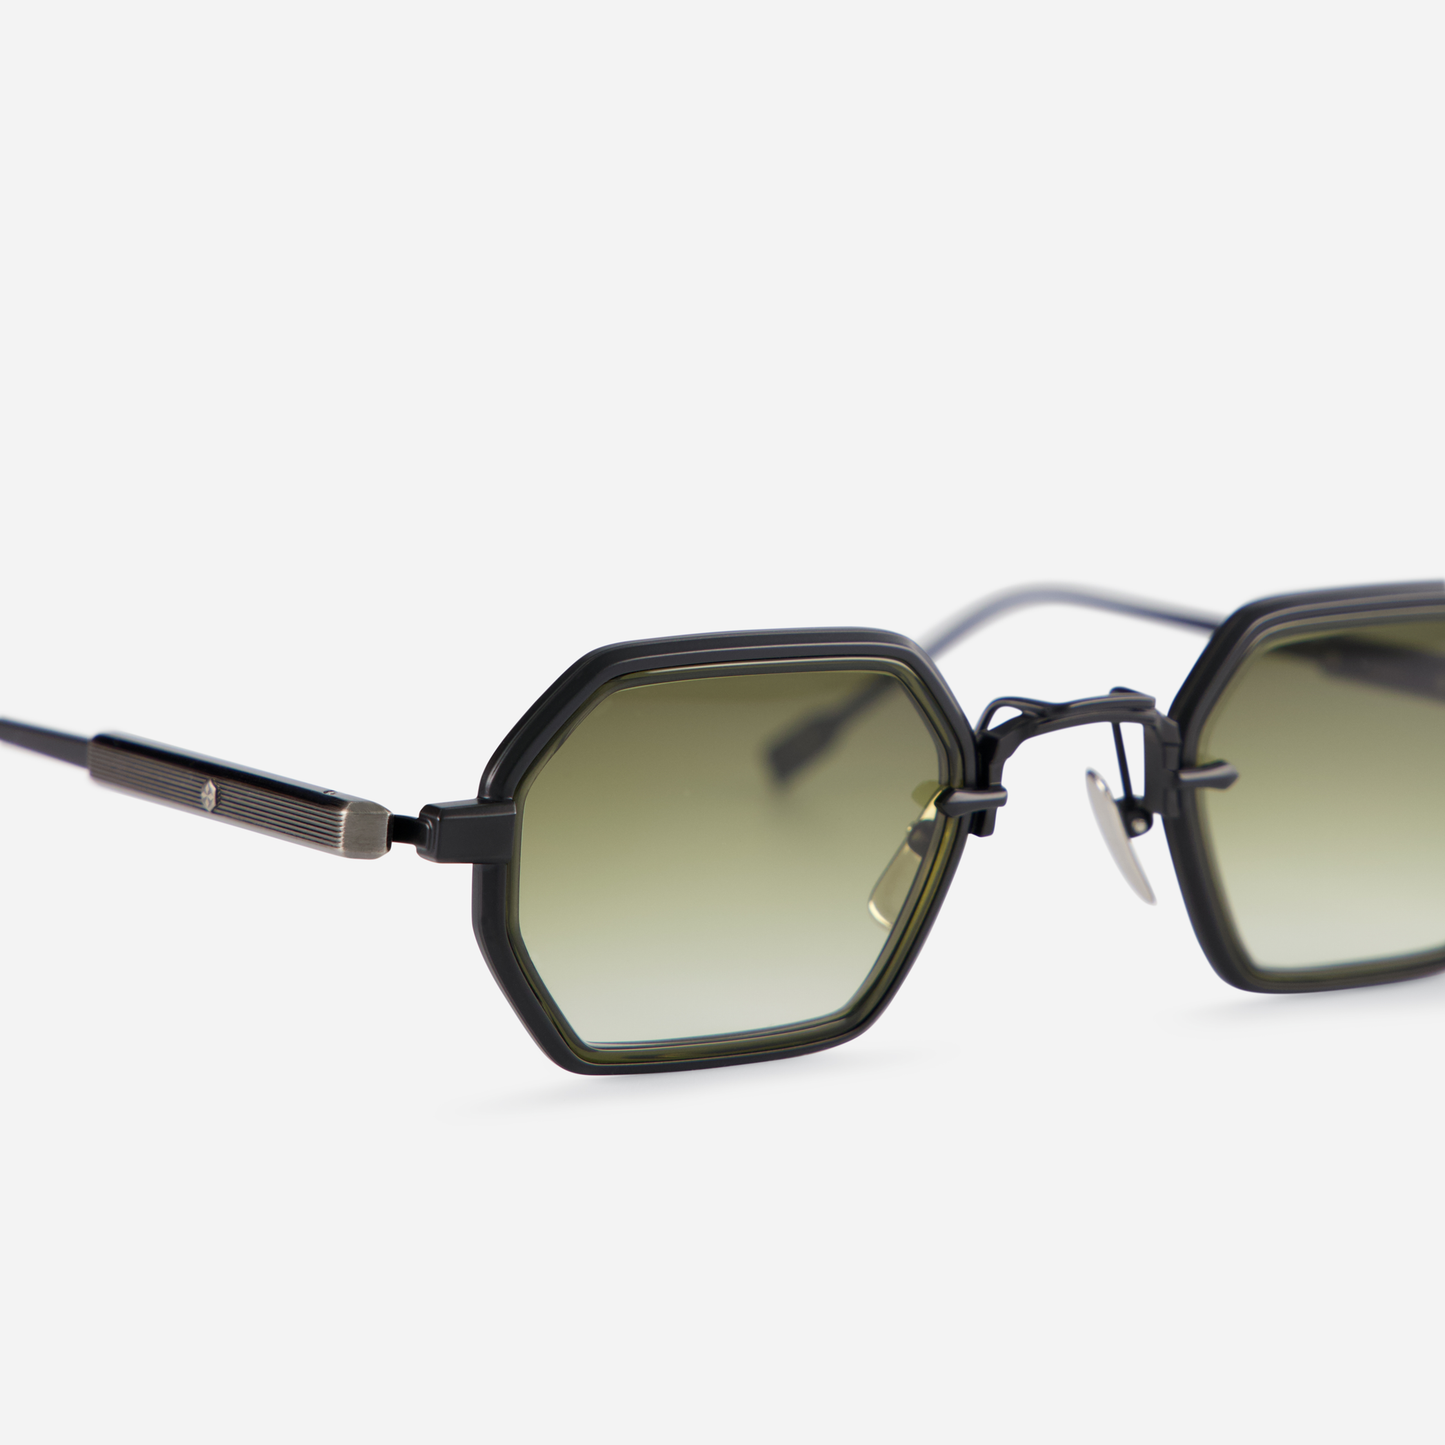 This eyewear, Hadar-T B/AS-1, includes a titanium frame with black mat and antique silver coatings, a green olive takiron rim insert, and gradient green lenses.